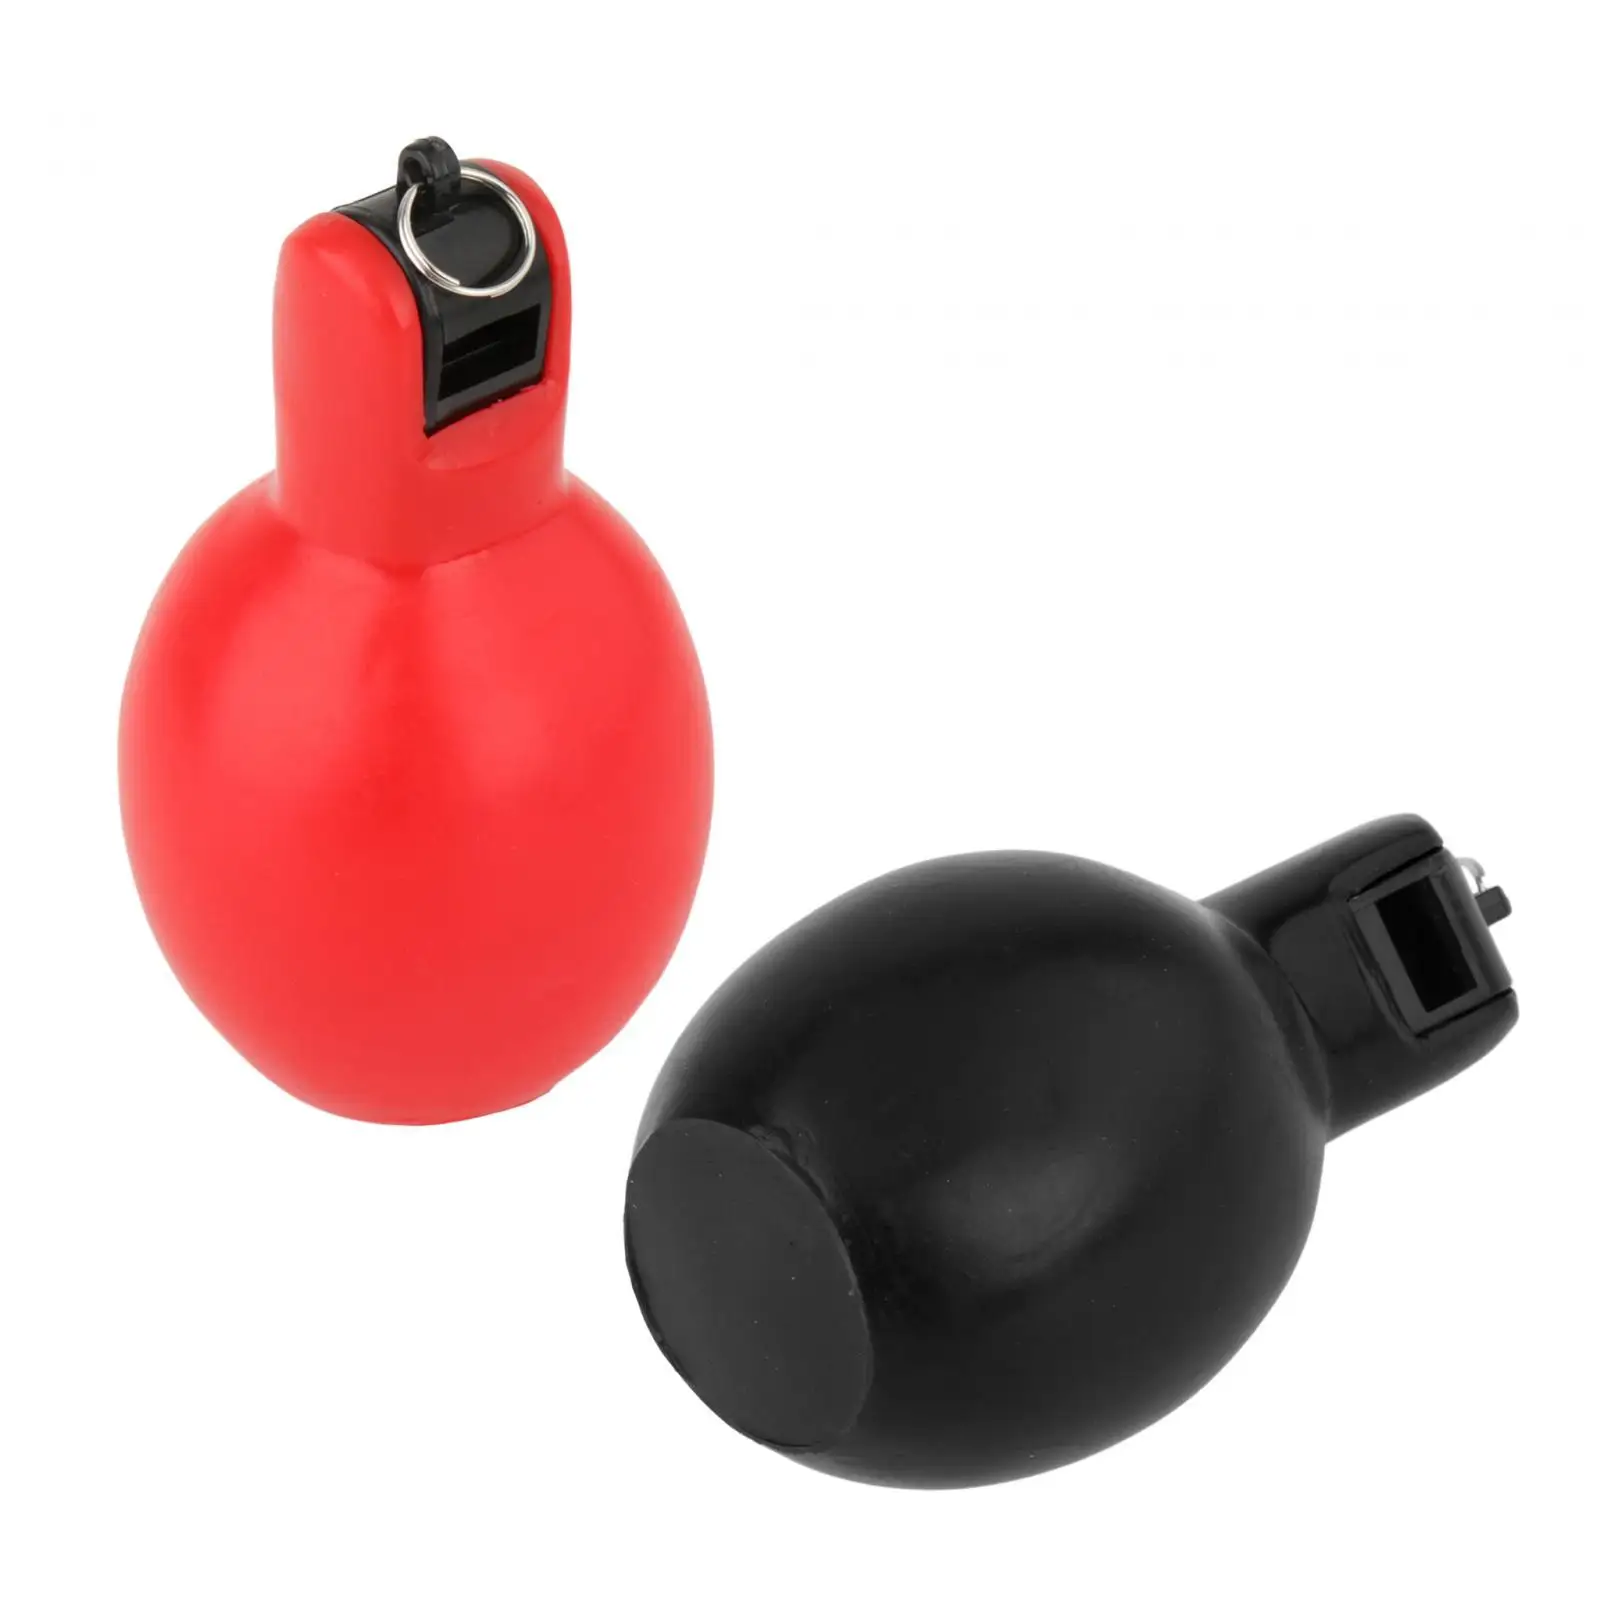 2x Hand Squeeze Whistles Coaches Whistle for Football Survival Home School